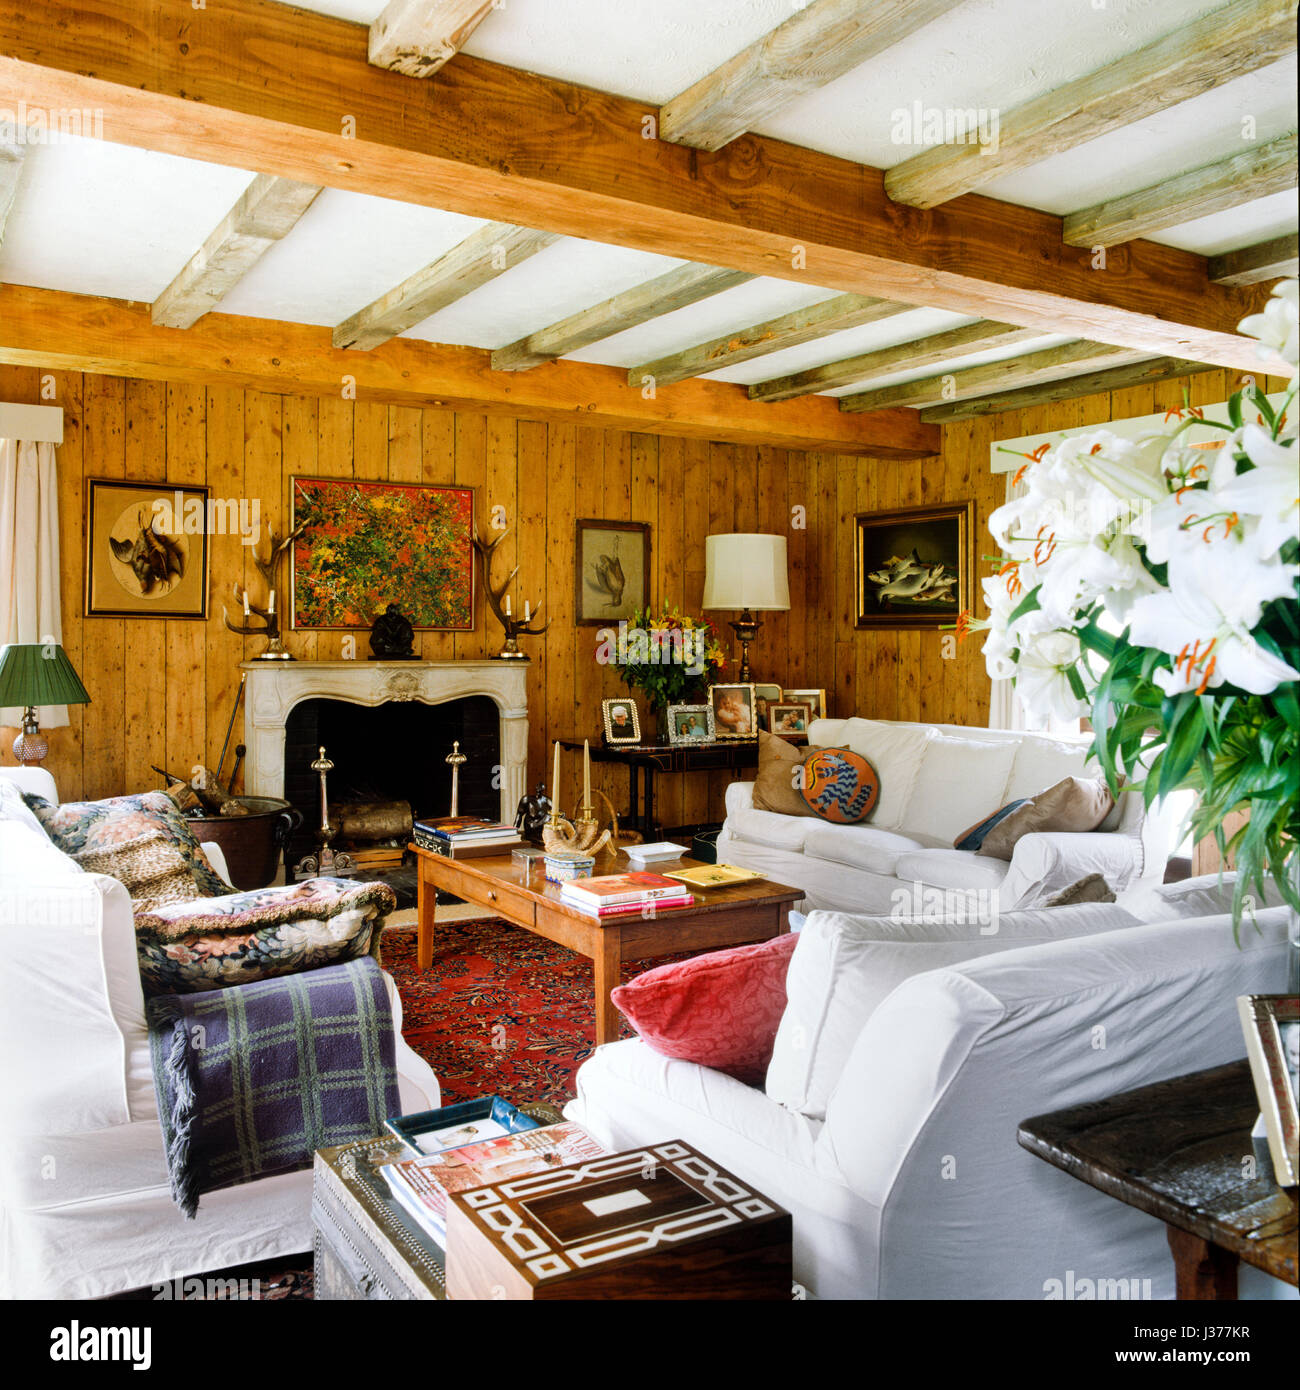 Rustic style living room. Stock Photo